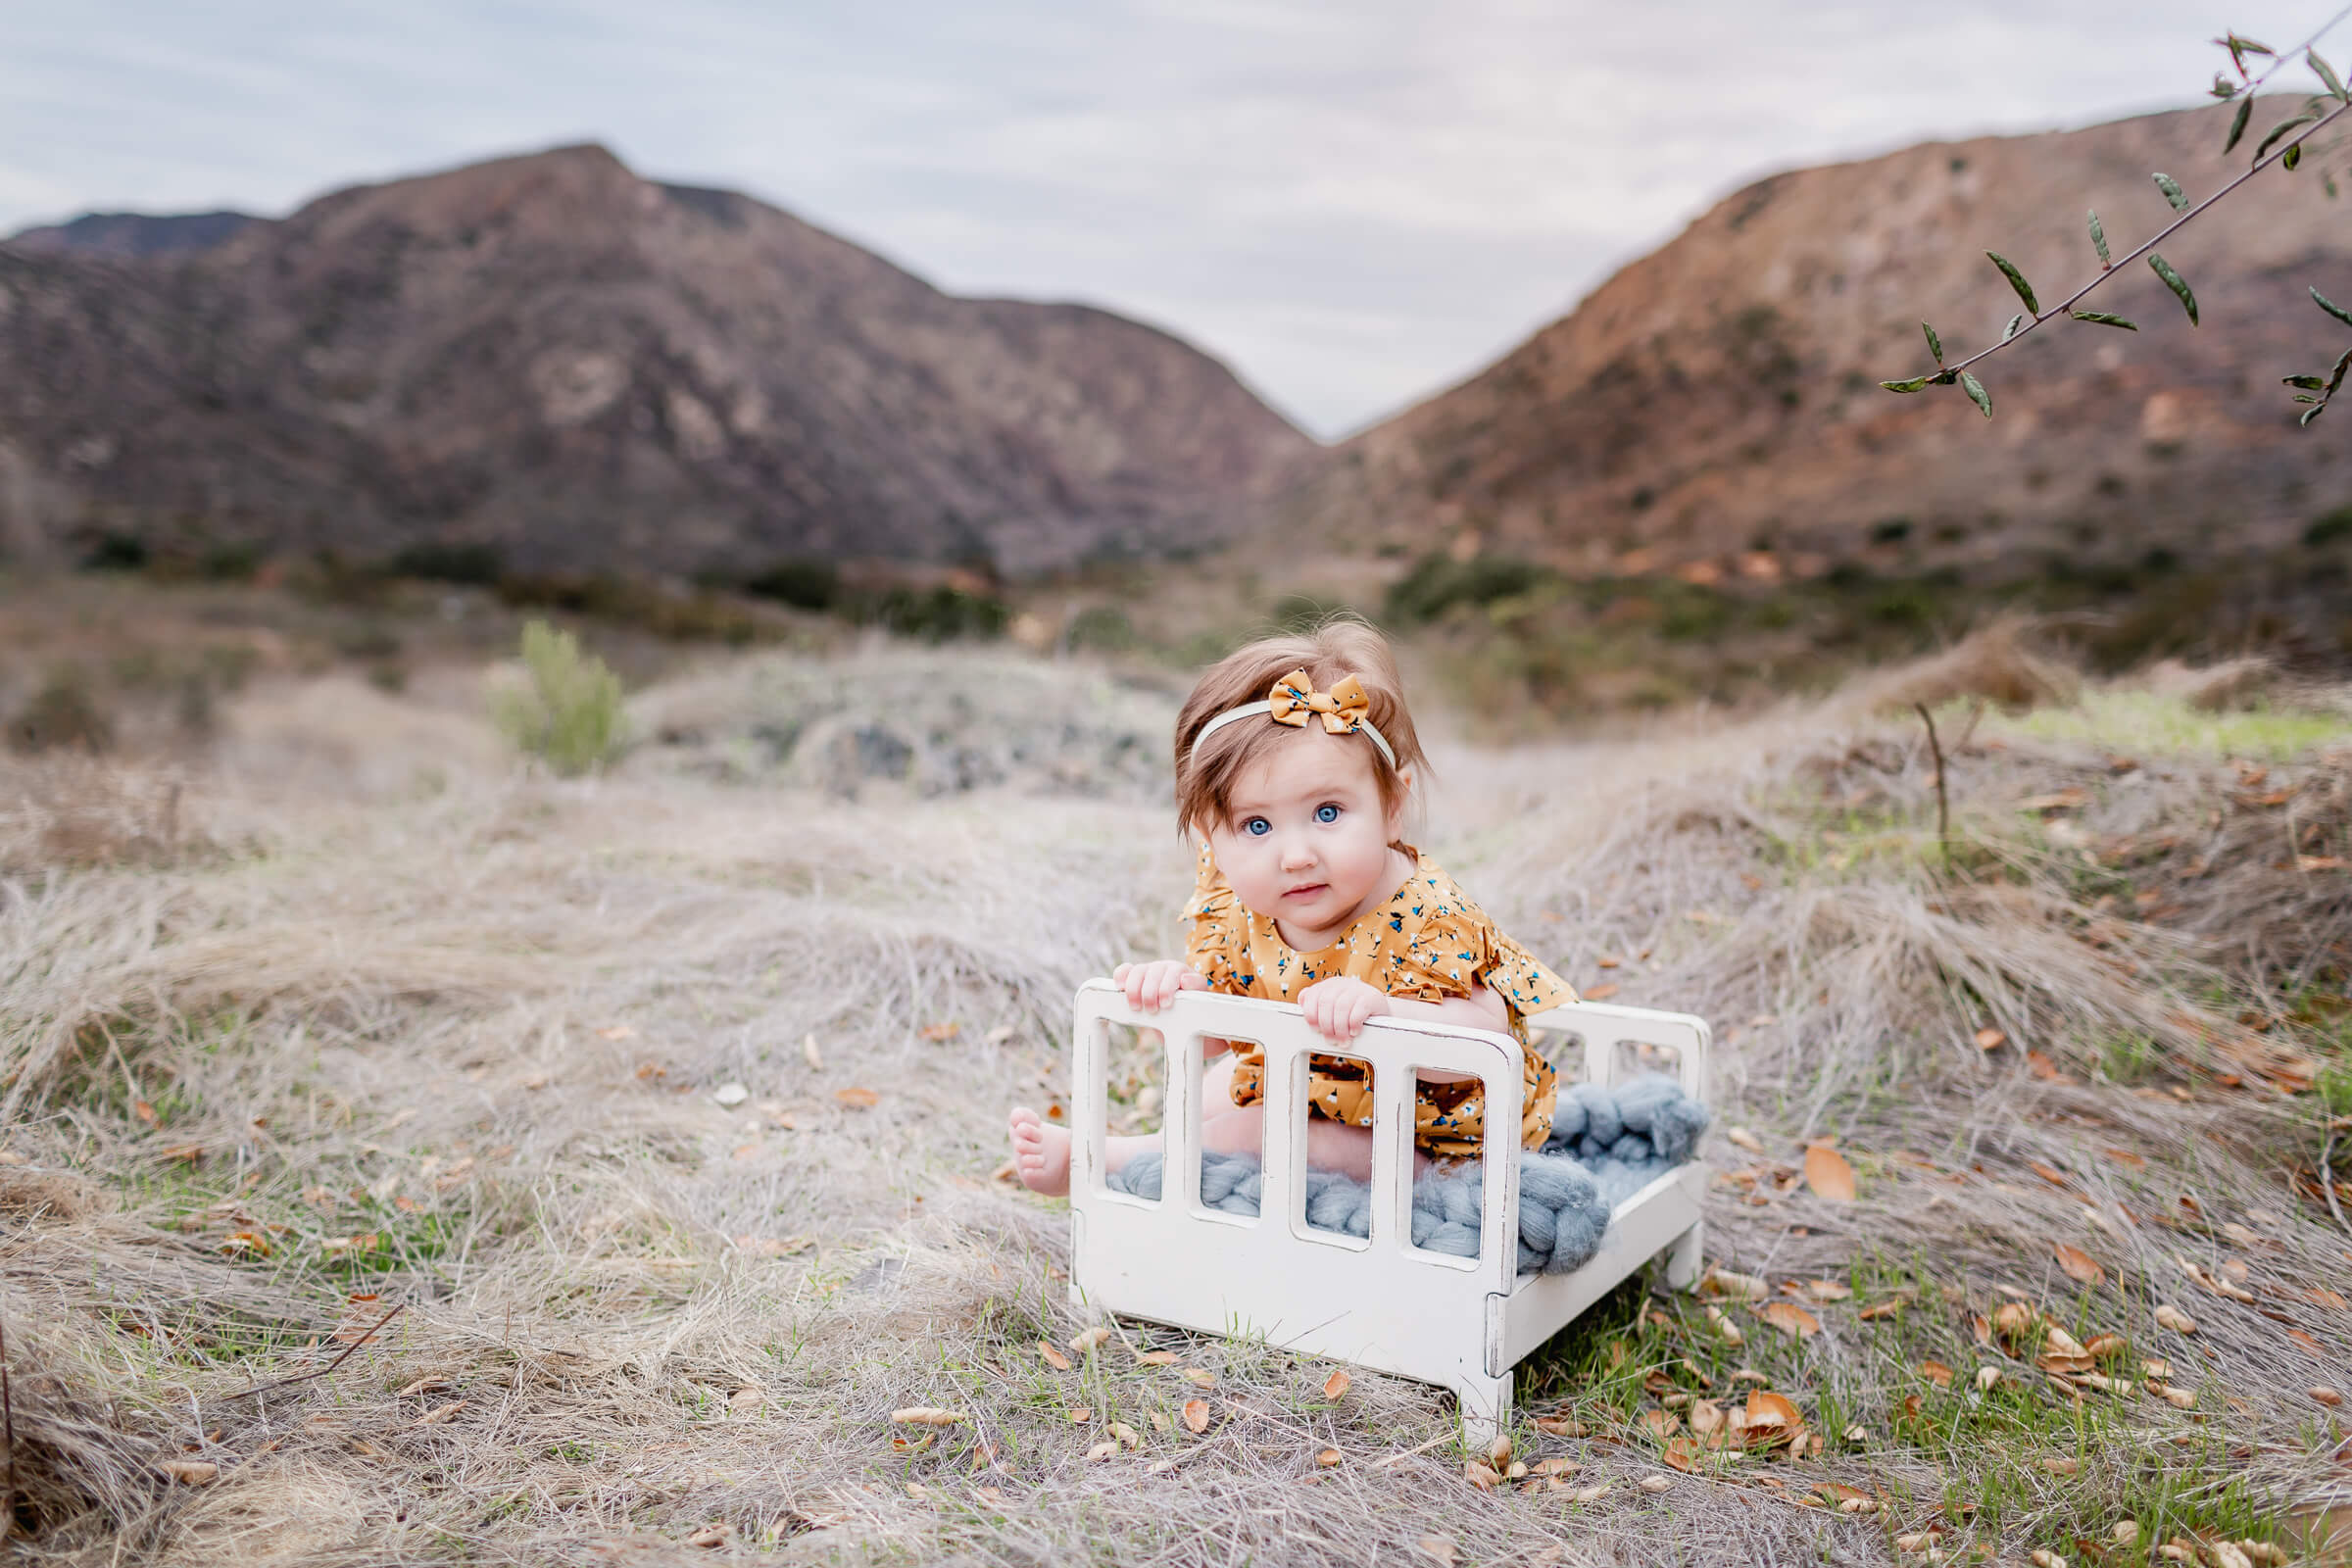 Outdoor 6 month milestone pictures with baby girl sitting in a field at Mission Trails Regional Park on a white bed wearing a yellow and blue flower outfit photographer by local San Diego Photographer Studio Freyja